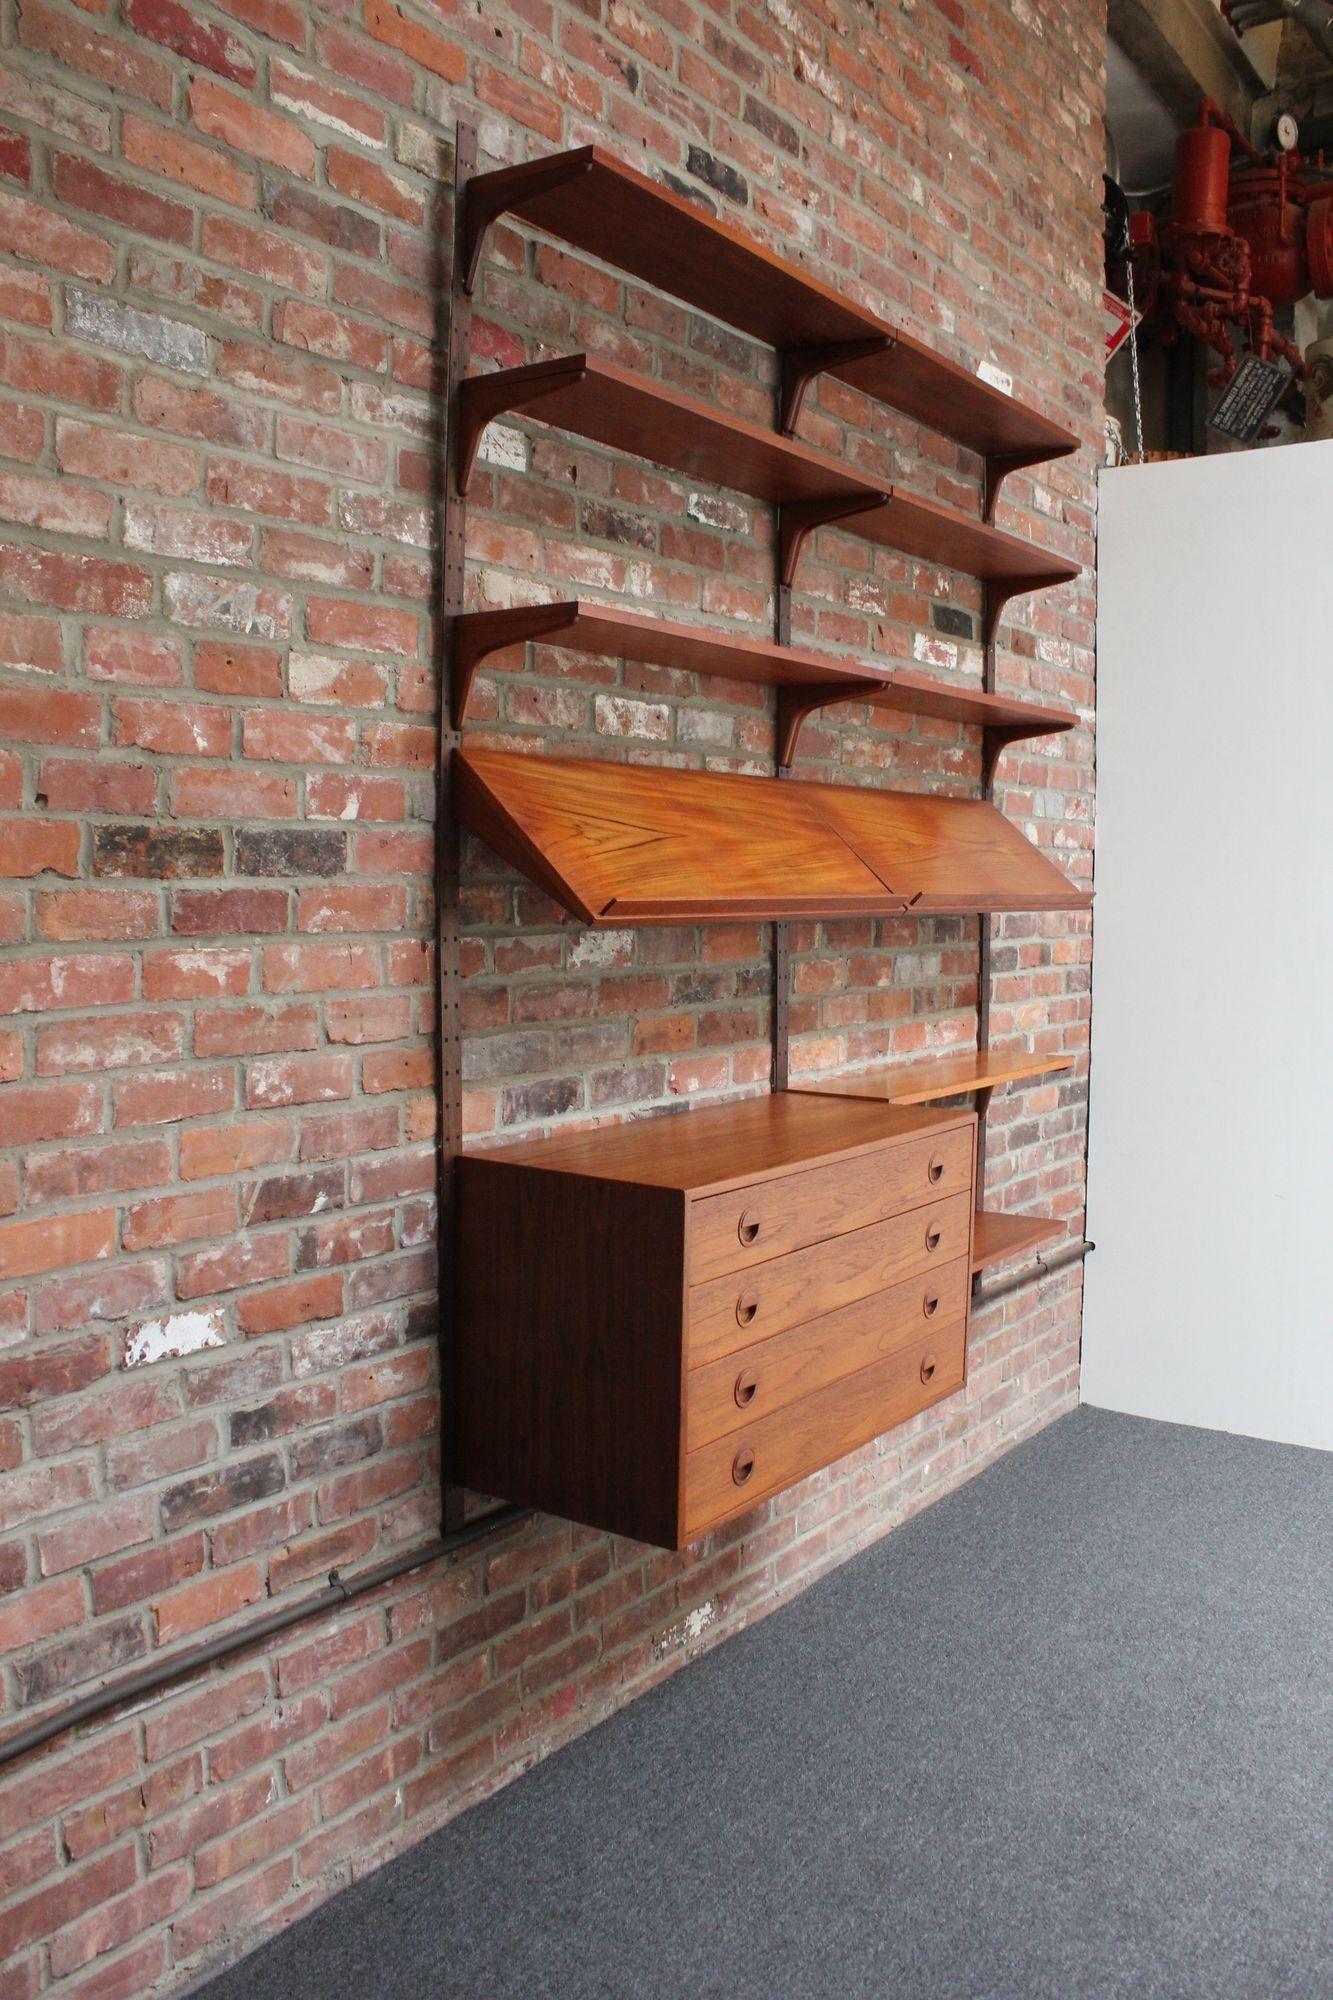 Two-bay modular teak wall unit designed by Rud Thygesen and Johnny Sørensen for Hansen and Guldborg (Denmark, 1960s).
Features the three original rosewood rails/uprights supporting the teak components - one four drawer cabinet with circular, inset